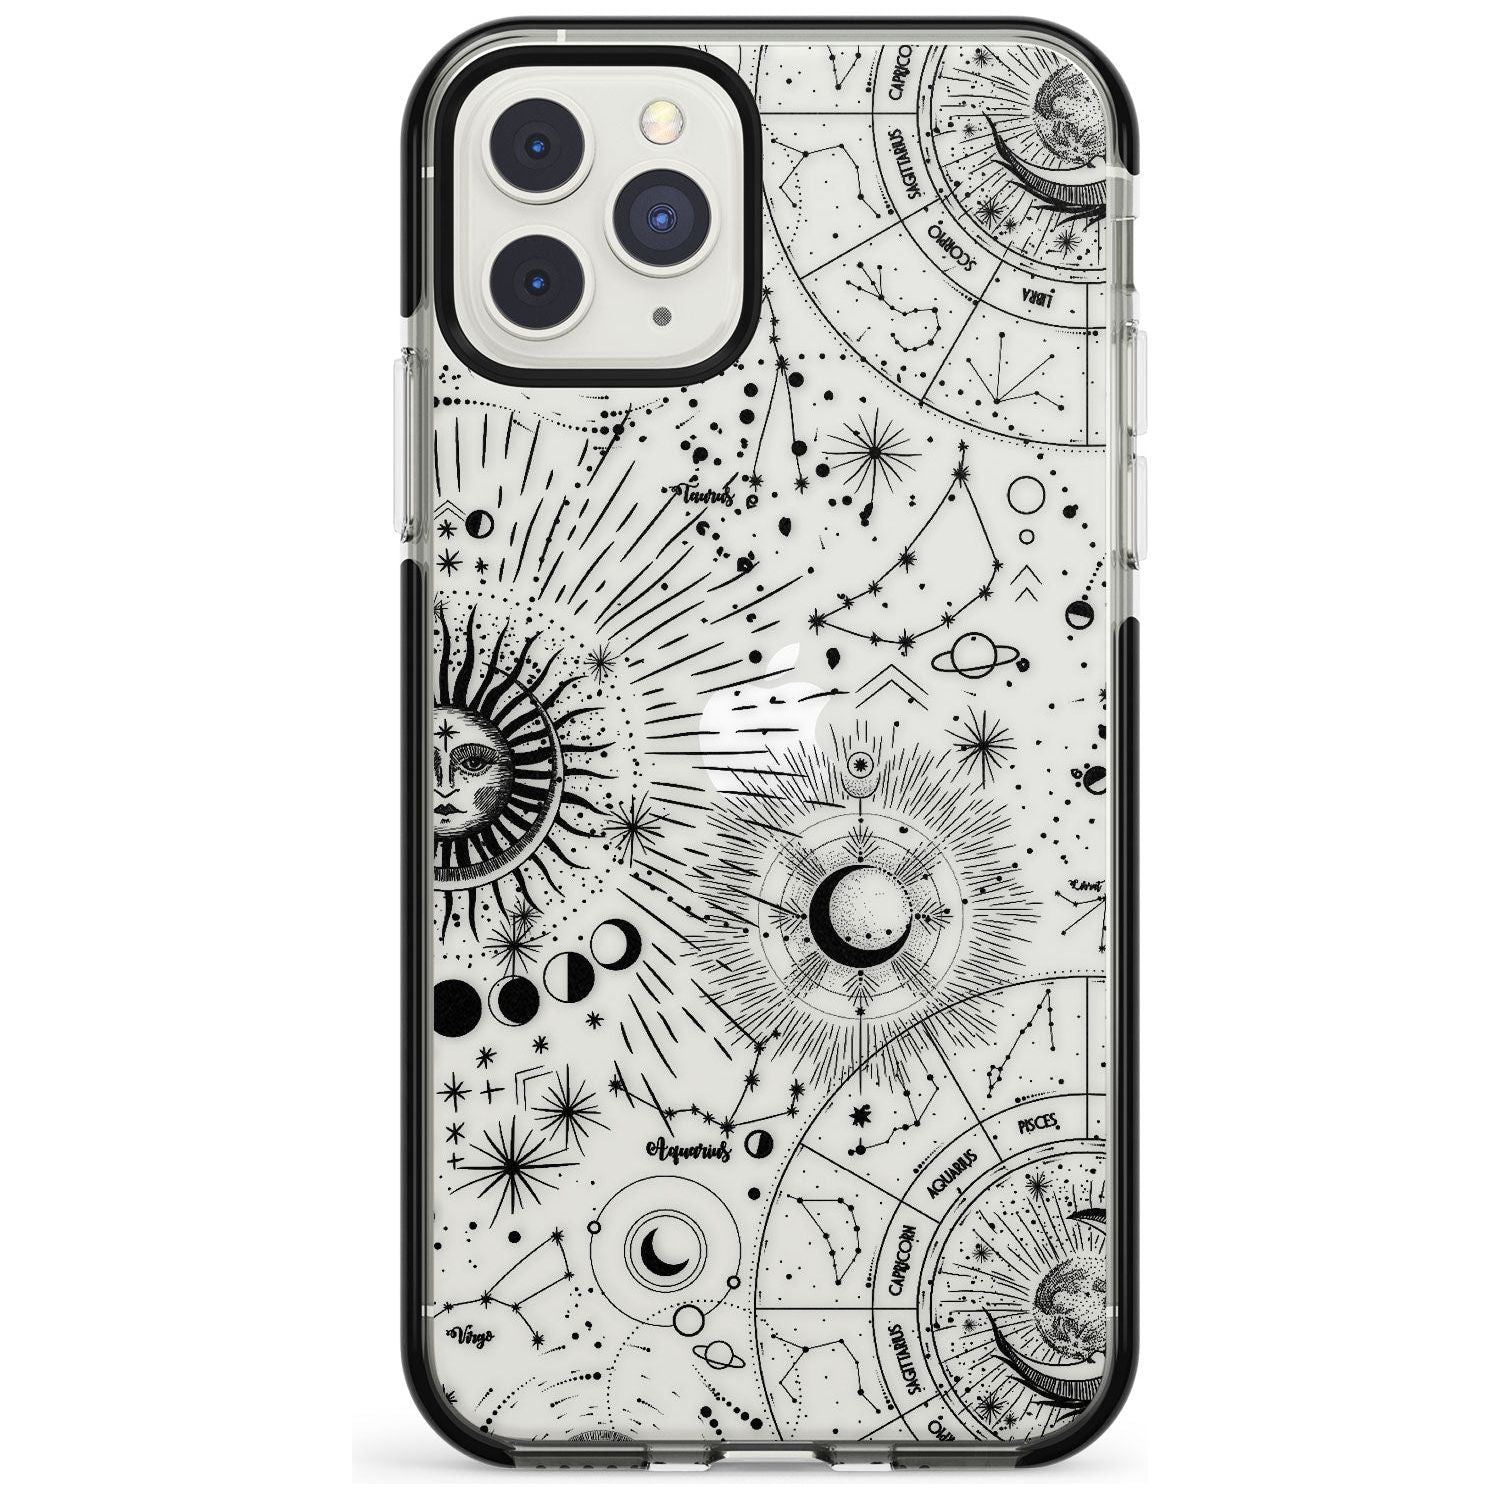 Suns & Constellations Astrological Black Impact Phone Case for iPhone 11 Pro Max